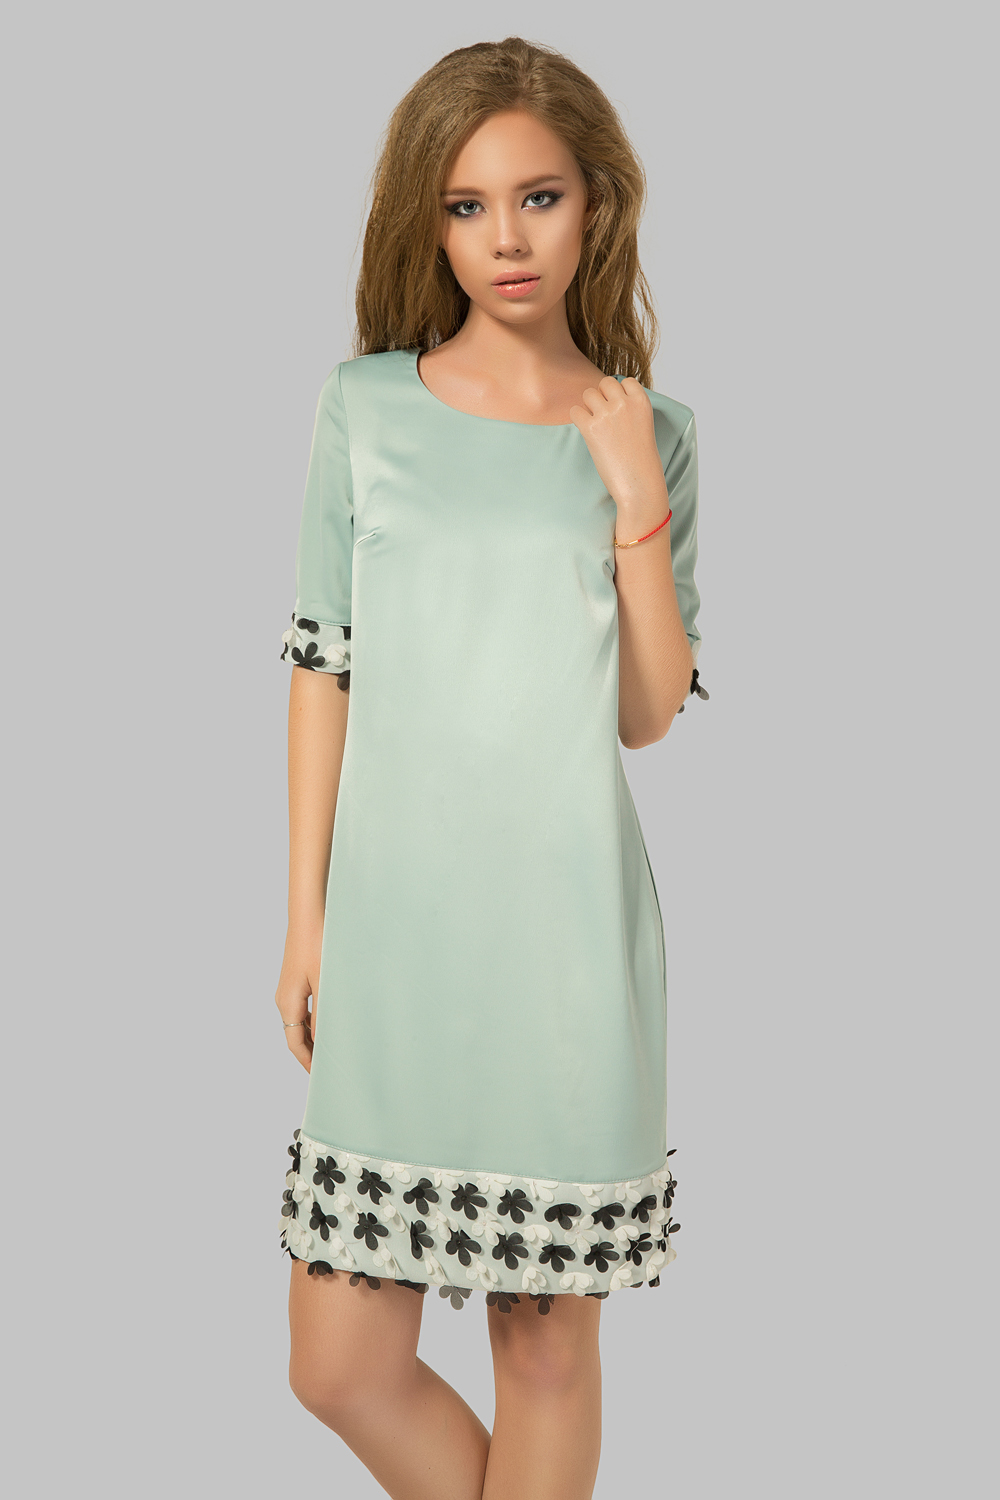 Dress with floral trim in sage colour